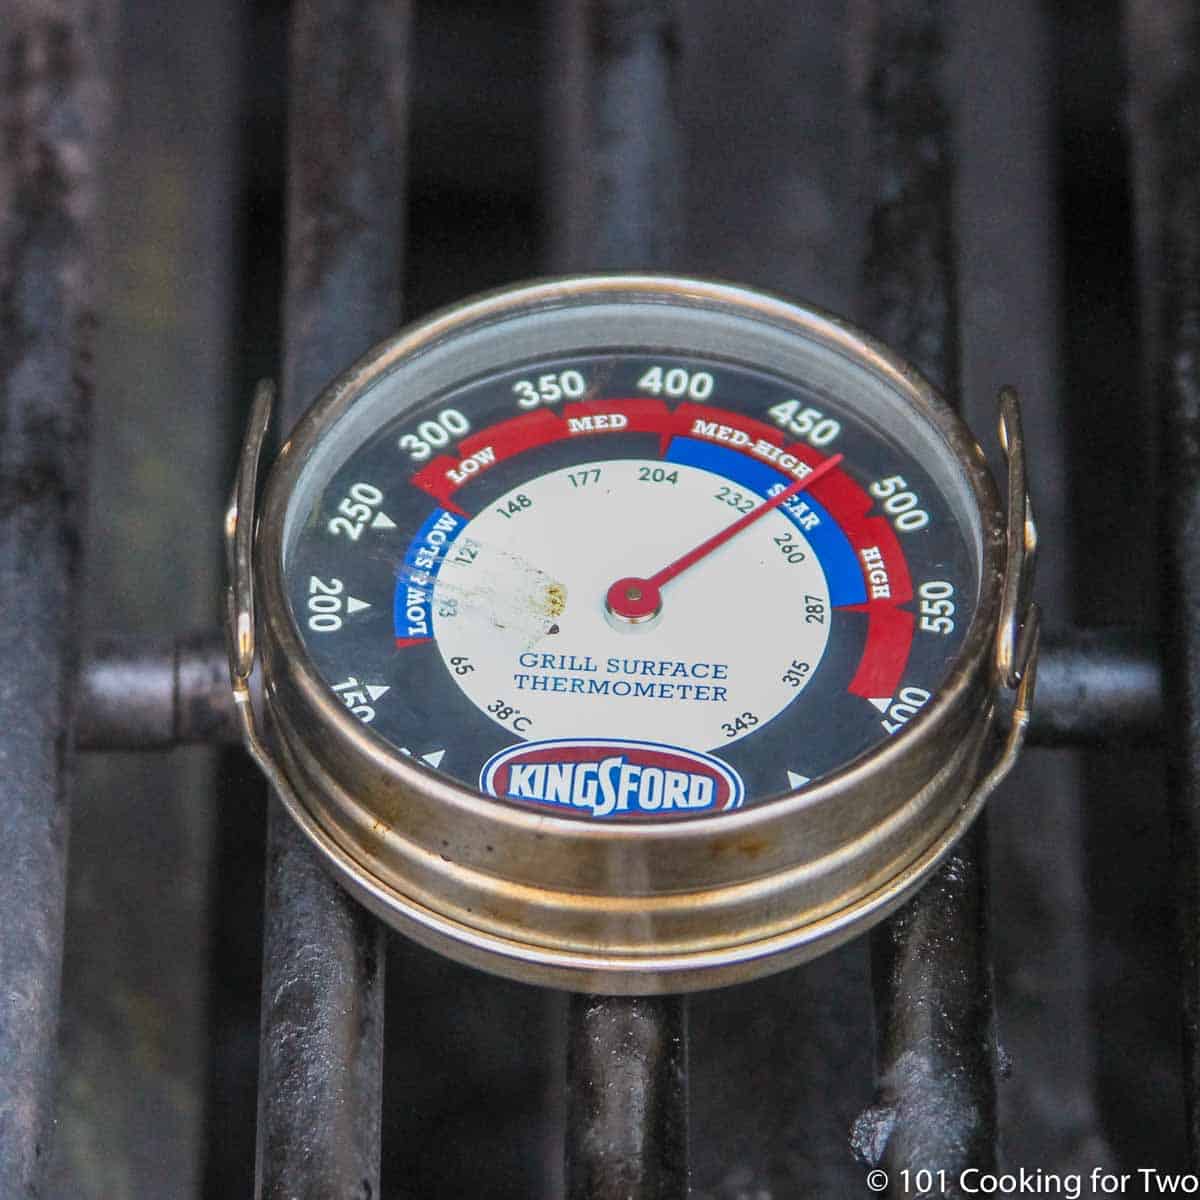 Grill surface thermometer on a grill grate.